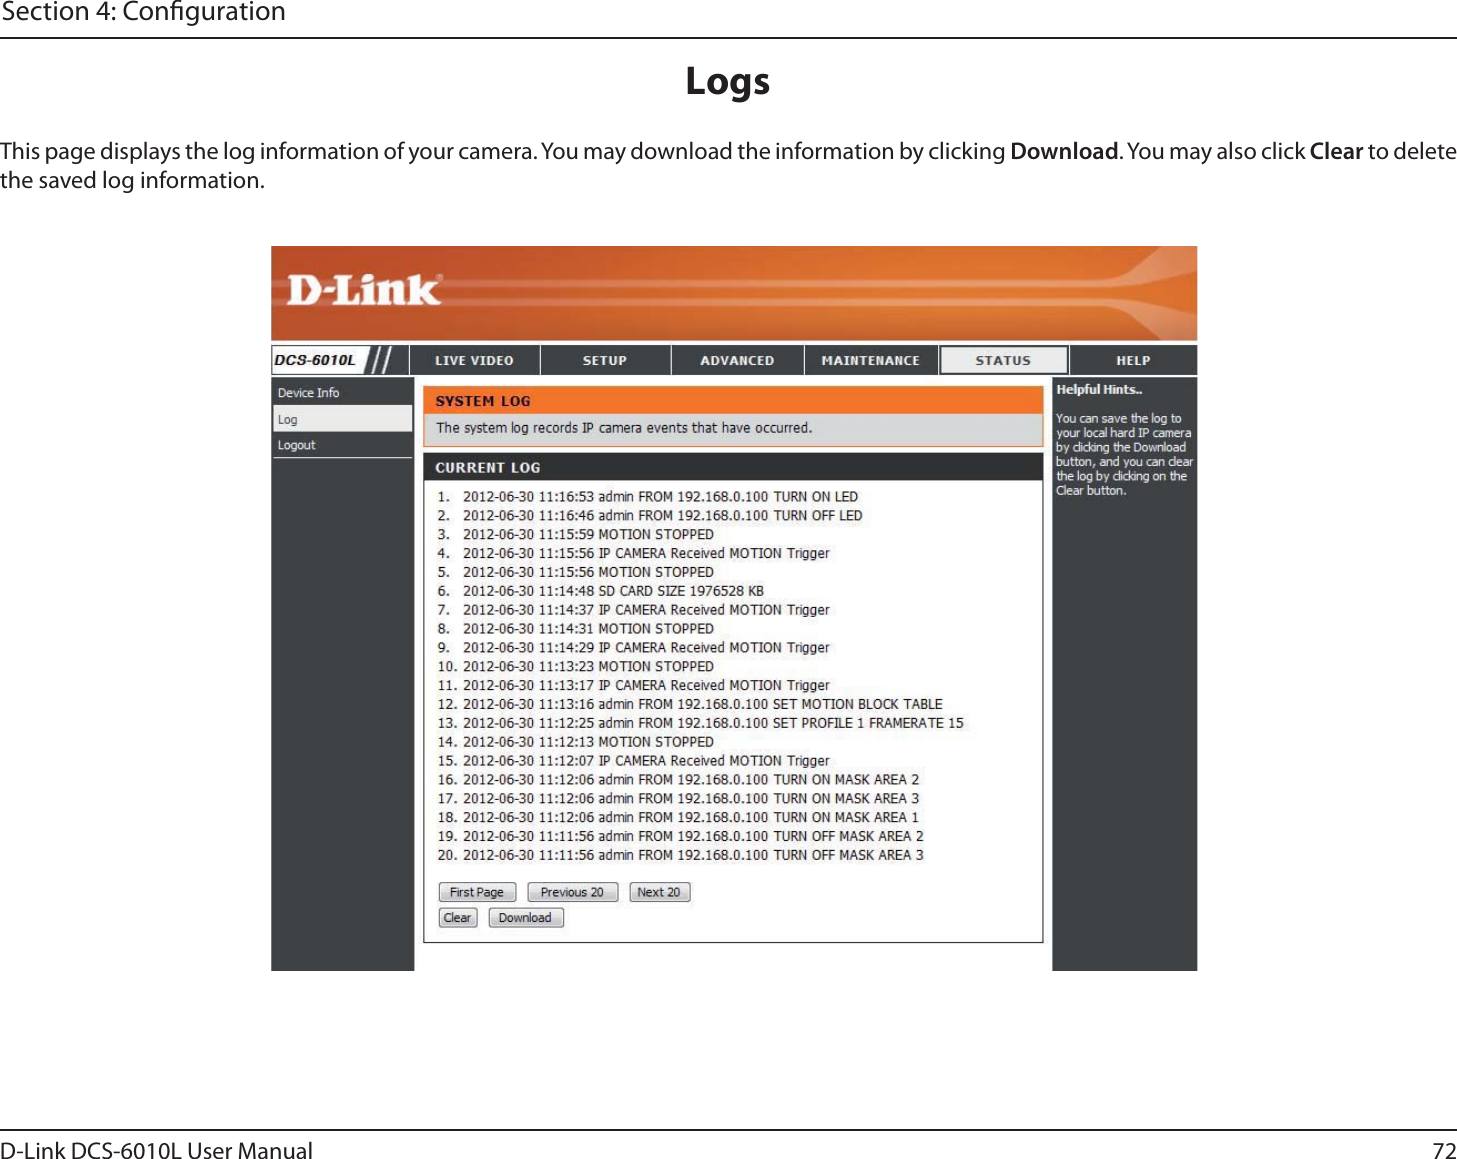 72D-Link DCS-6010L User ManualSection 4: CongurationThis page displays the log information of your camera. You may download the information by clicking Download. You may also click Clear to delete the saved log information.Logs